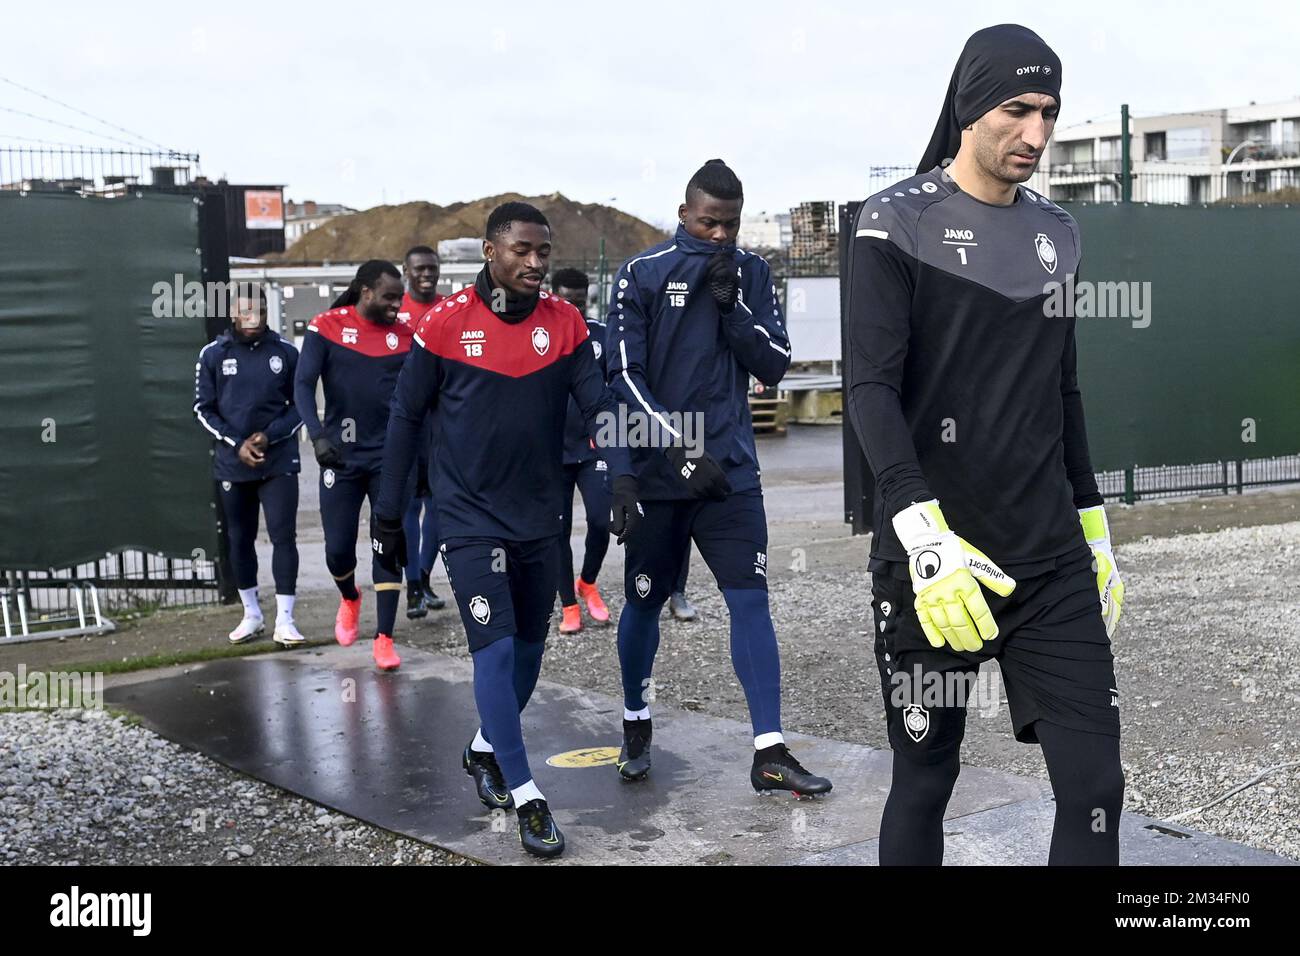 Antwerp's goalkeeper Alireza Beiranvand pictured during a training session of Belgian soccer club Royal Antwerp FC, Wednesday 17 February 2021 in Antwerp. The team is preparing for their match against Scottisch Rangers F.C. in the first leg of the 1/16 finals of the UEFA Europa League competition. BELGA PHOTO DIRK WAEM Stock Photo